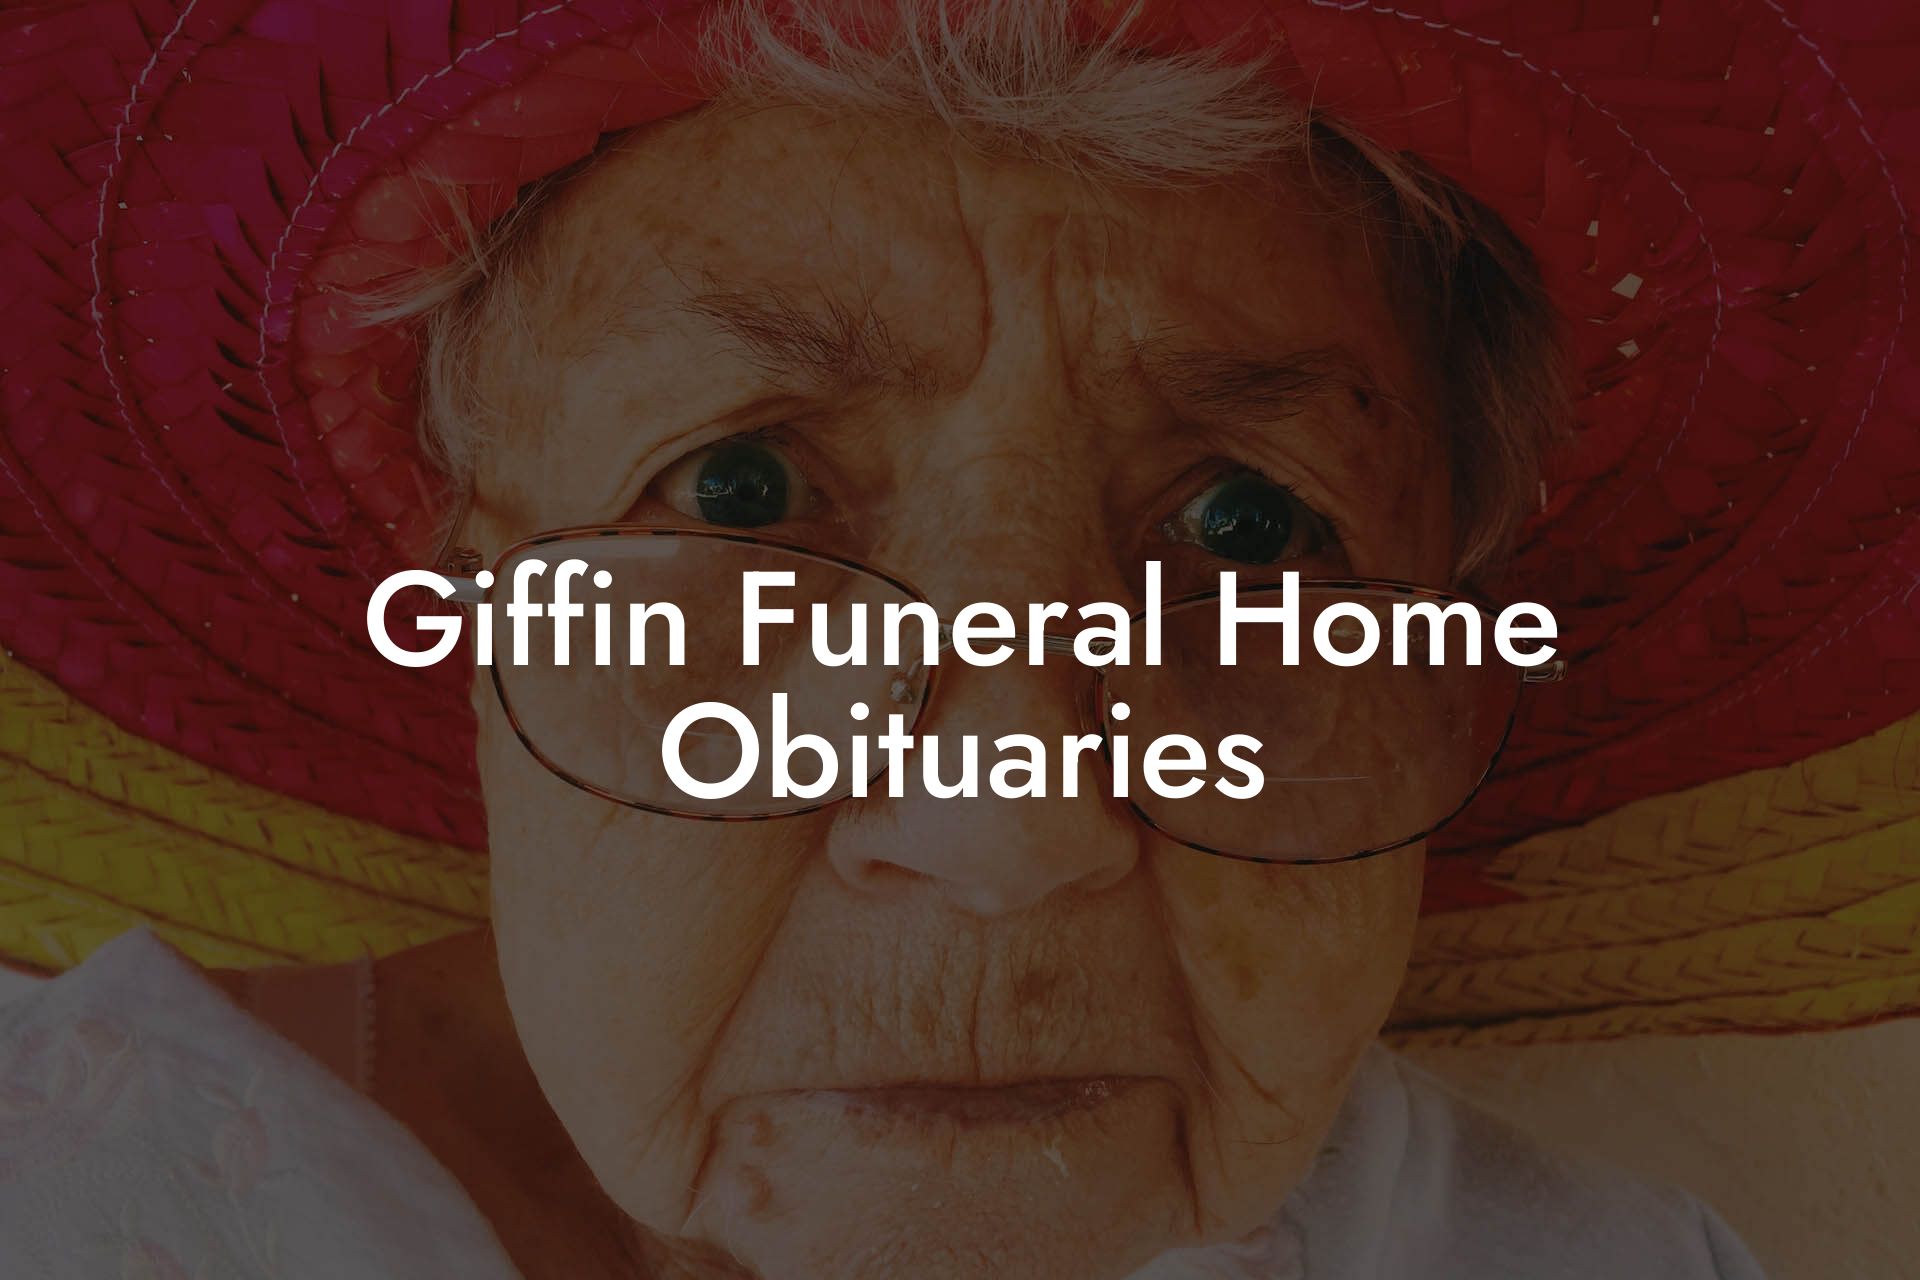 Giffin Funeral Home Obituaries